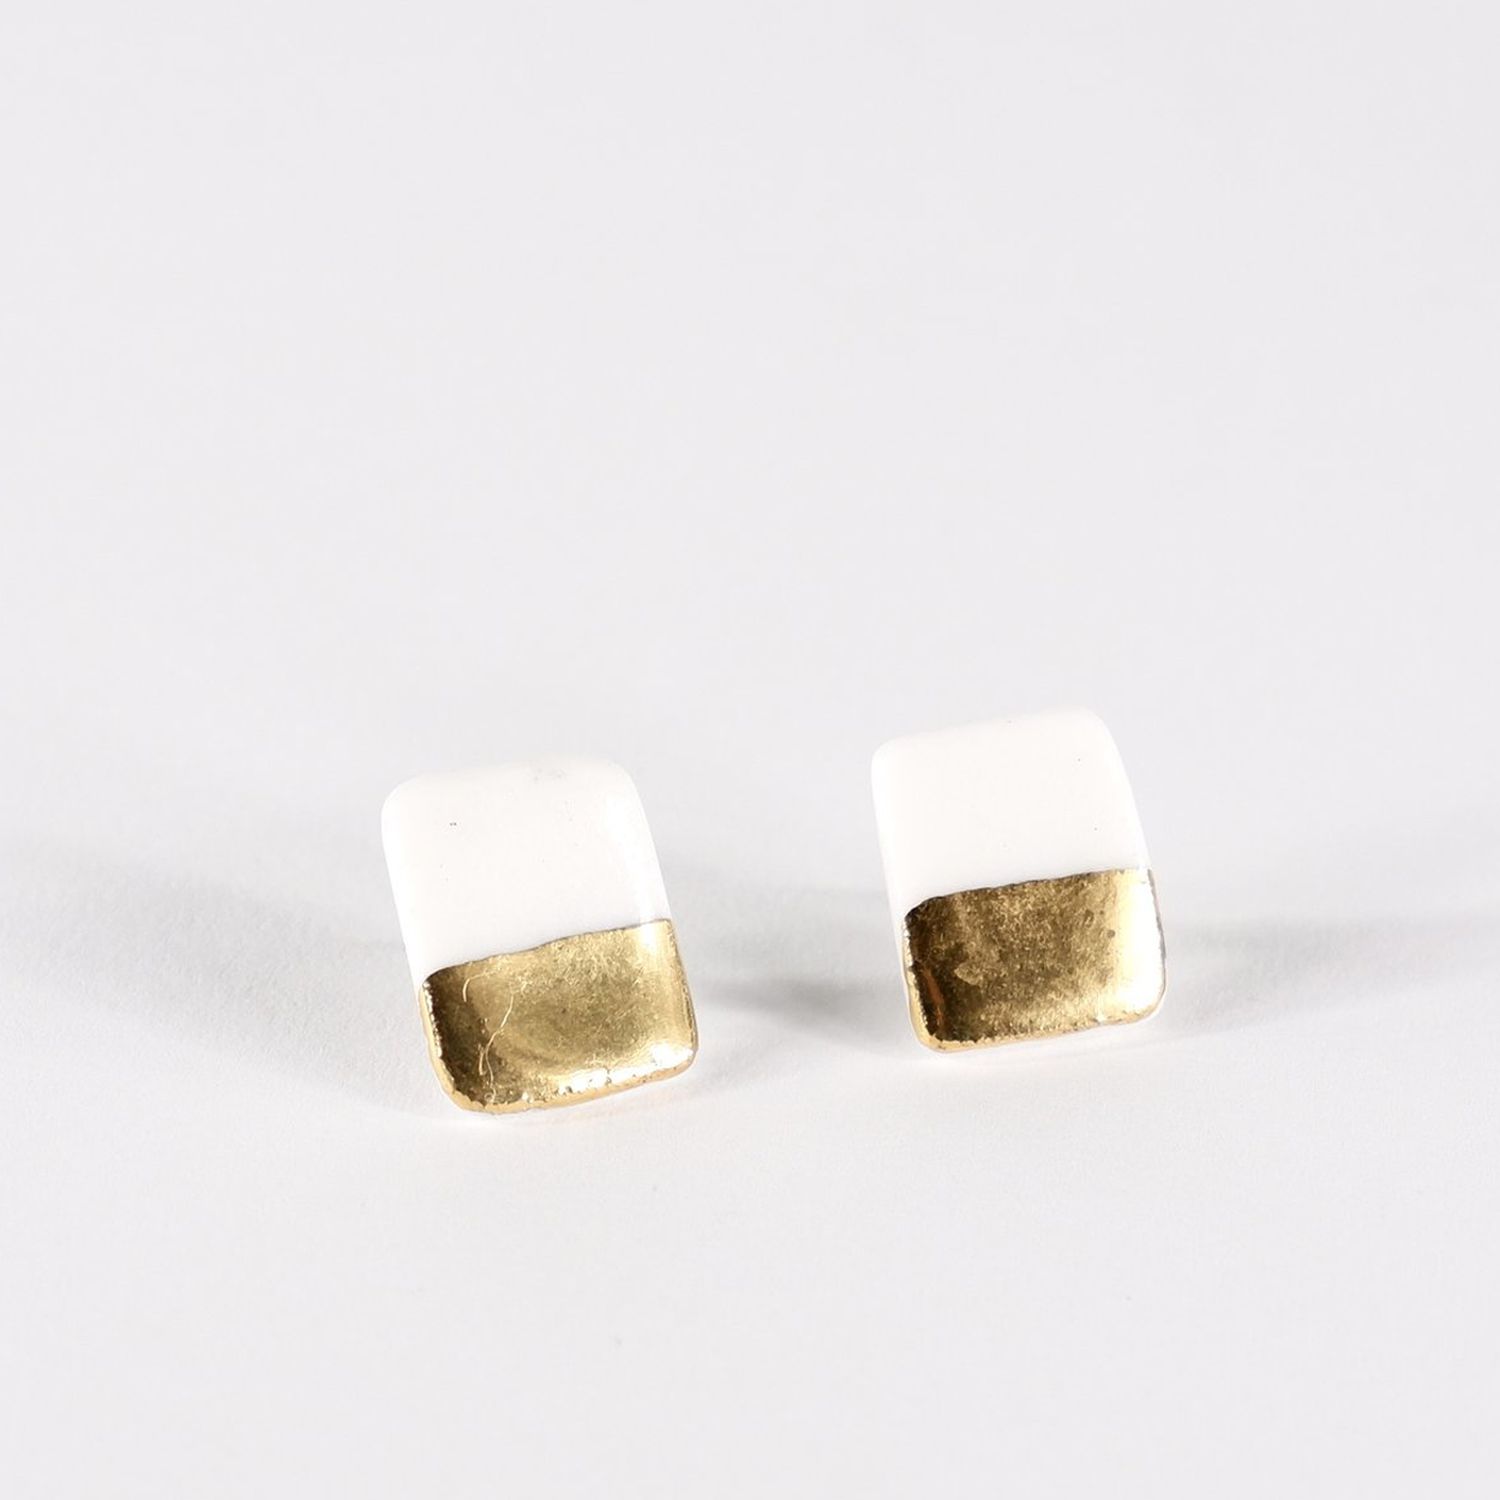 Rachael Kroeker: White and Gold Studs Earrings Product Image 1 of 1